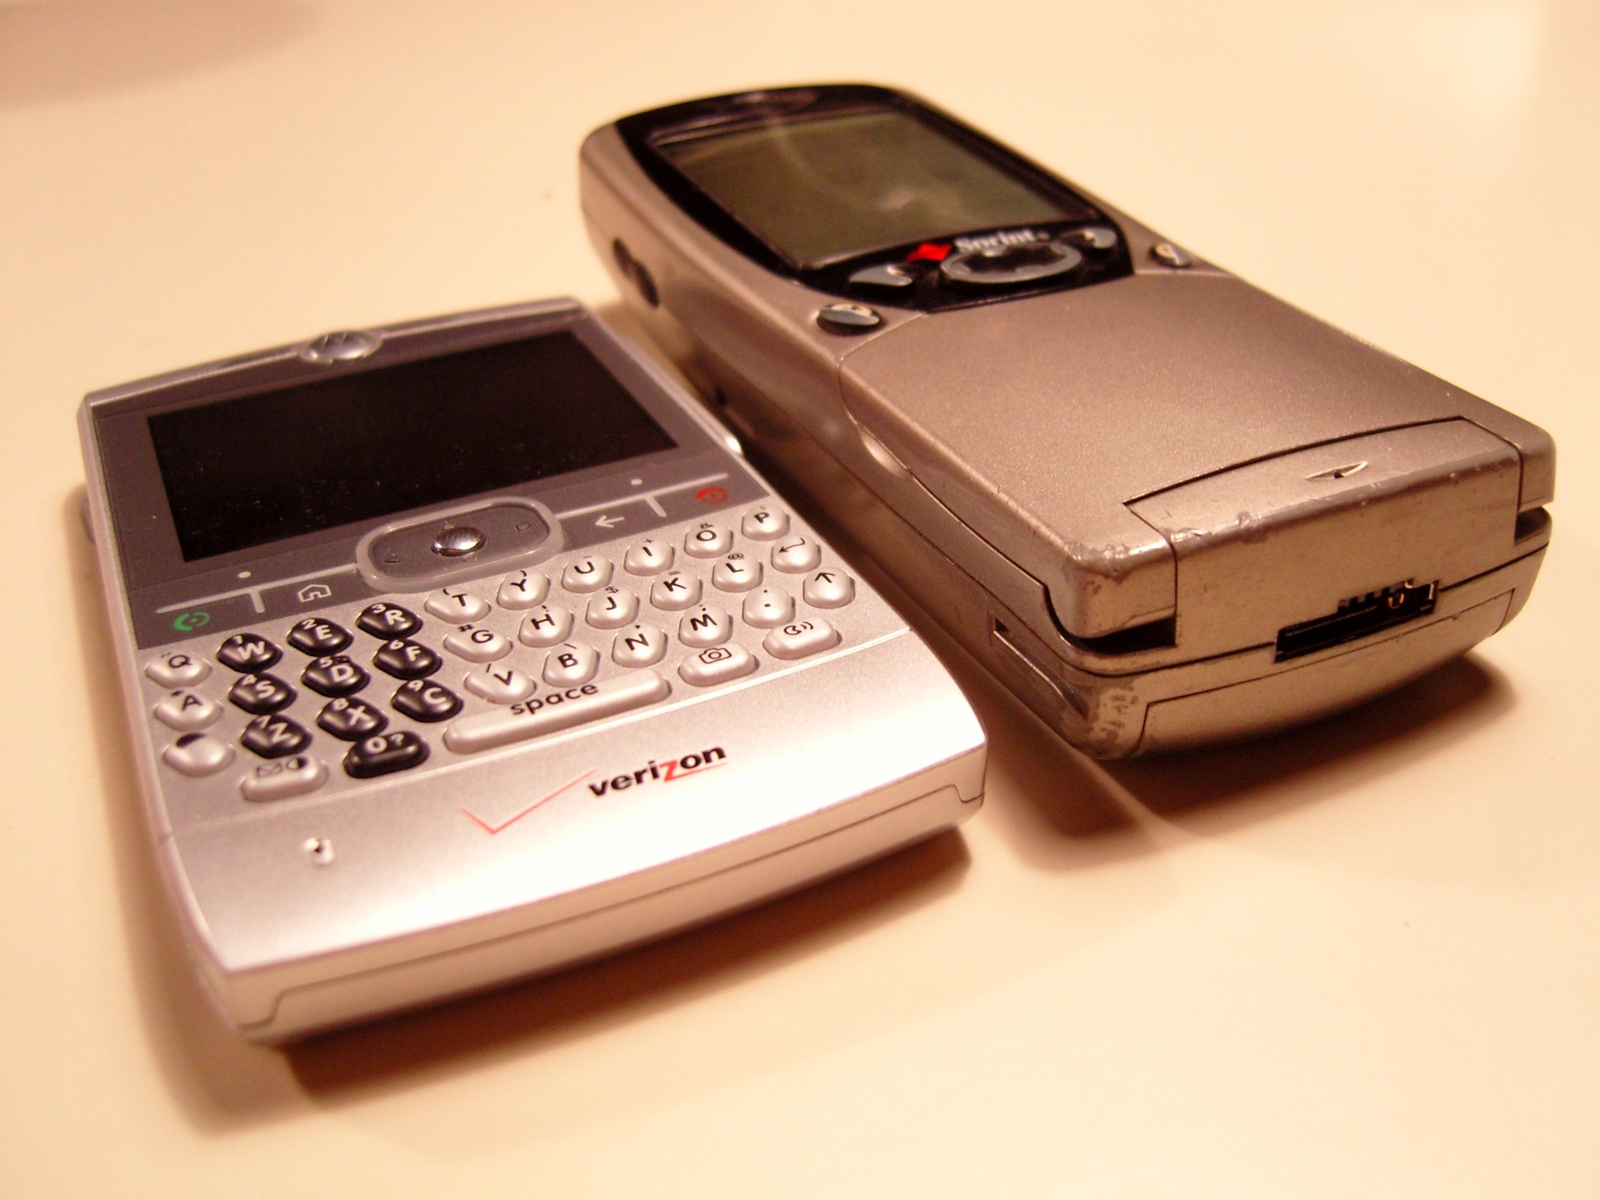 a flip phone with an older model cell phone on top